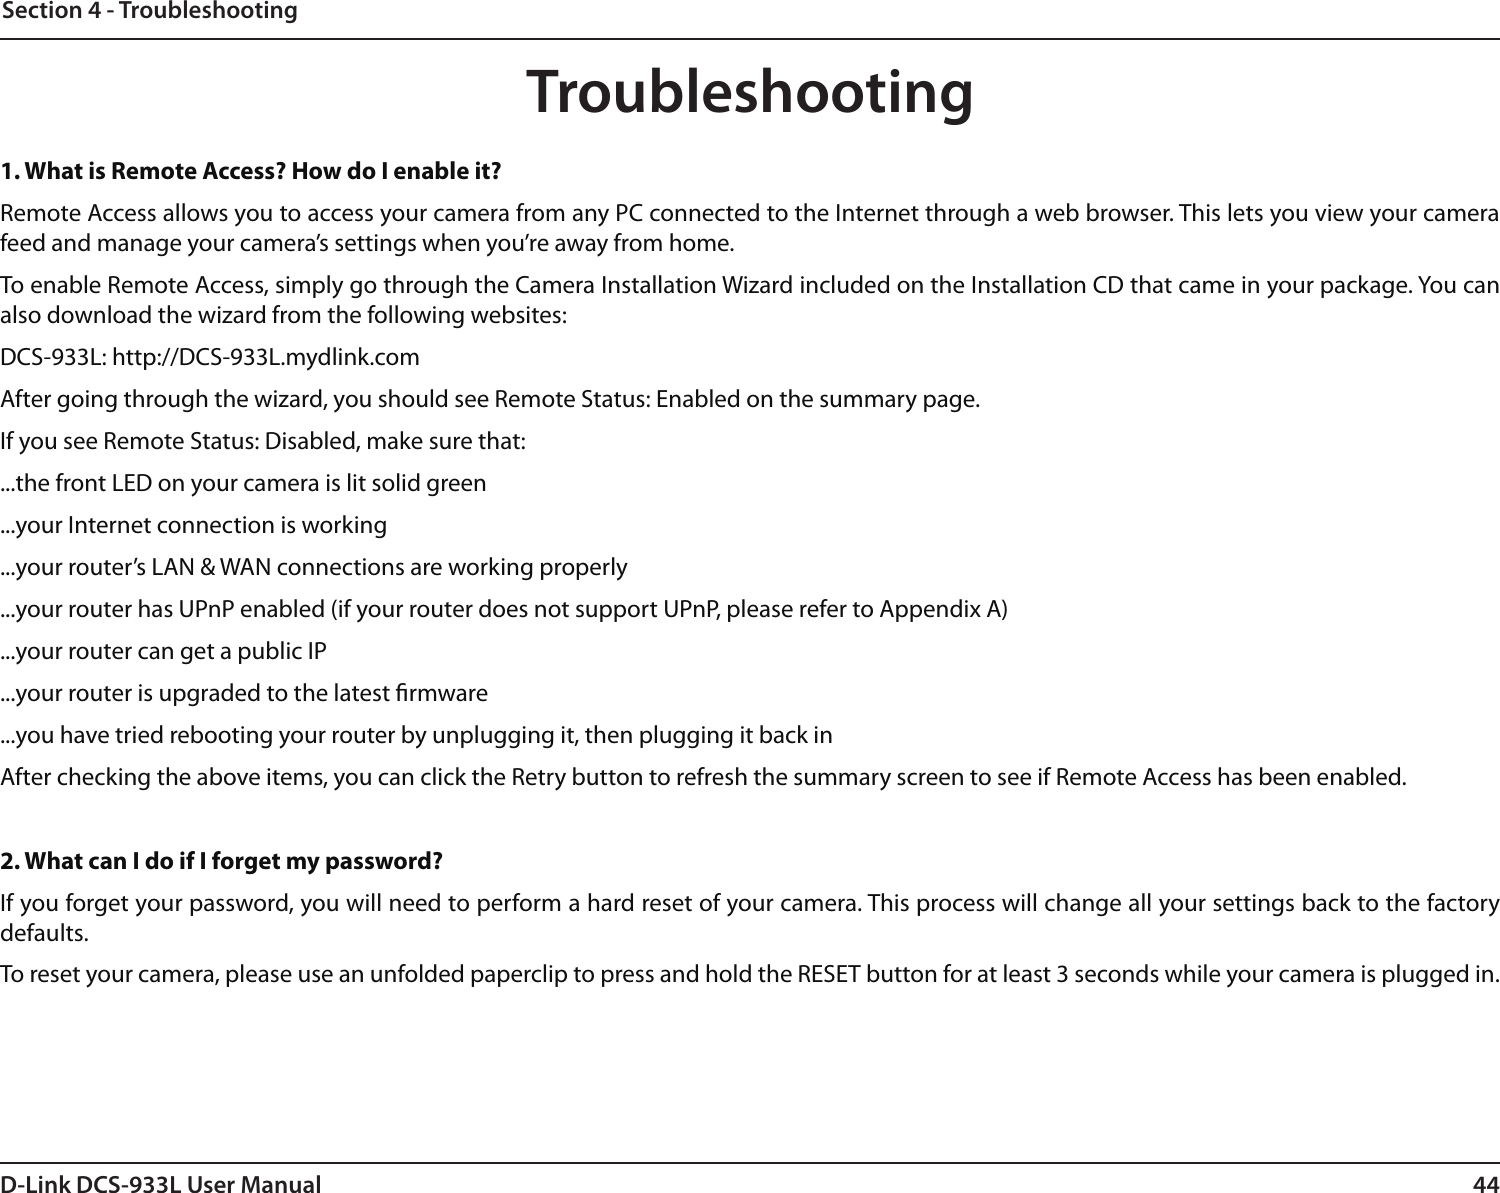 44D-Link DCS-933L User ManualSection 4 - TroubleshootingTroubleshooting1. What is Remote Access? How do I enable it?Remote Access allows you to access your camera from any PC connected to the Internet through a web browser. This lets you view your camera feed and manage your camera’s settings when you’re away from home. To enable Remote Access, simply go through the Camera Installation Wizard included on the Installation CD that came in your package. You can also download the wizard from the following websites:DCS-933L: http://DCS-933L.mydlink.comAfter going through the wizard, you should see Remote Status: Enabled on the summary page.If you see Remote Status: Disabled, make sure that:...the front LED on your camera is lit solid green...your Internet connection is working...your router’s LAN &amp; WAN connections are working properly...your router has UPnP enabled (if your router does not support UPnP, please refer to Appendix A)...your router can get a public IP...your router is upgraded to the latest rmware...you have tried rebooting your router by unplugging it, then plugging it back inAfter checking the above items, you can click the Retry button to refresh the summary screen to see if Remote Access has been enabled.2. What can I do if I forget my password?If you forget your password, you will need to perform a hard reset of your camera. This process will change all your settings back to the factory defaults.To reset your camera, please use an unfolded paperclip to press and hold the RESET button for at least 3 seconds while your camera is plugged in.